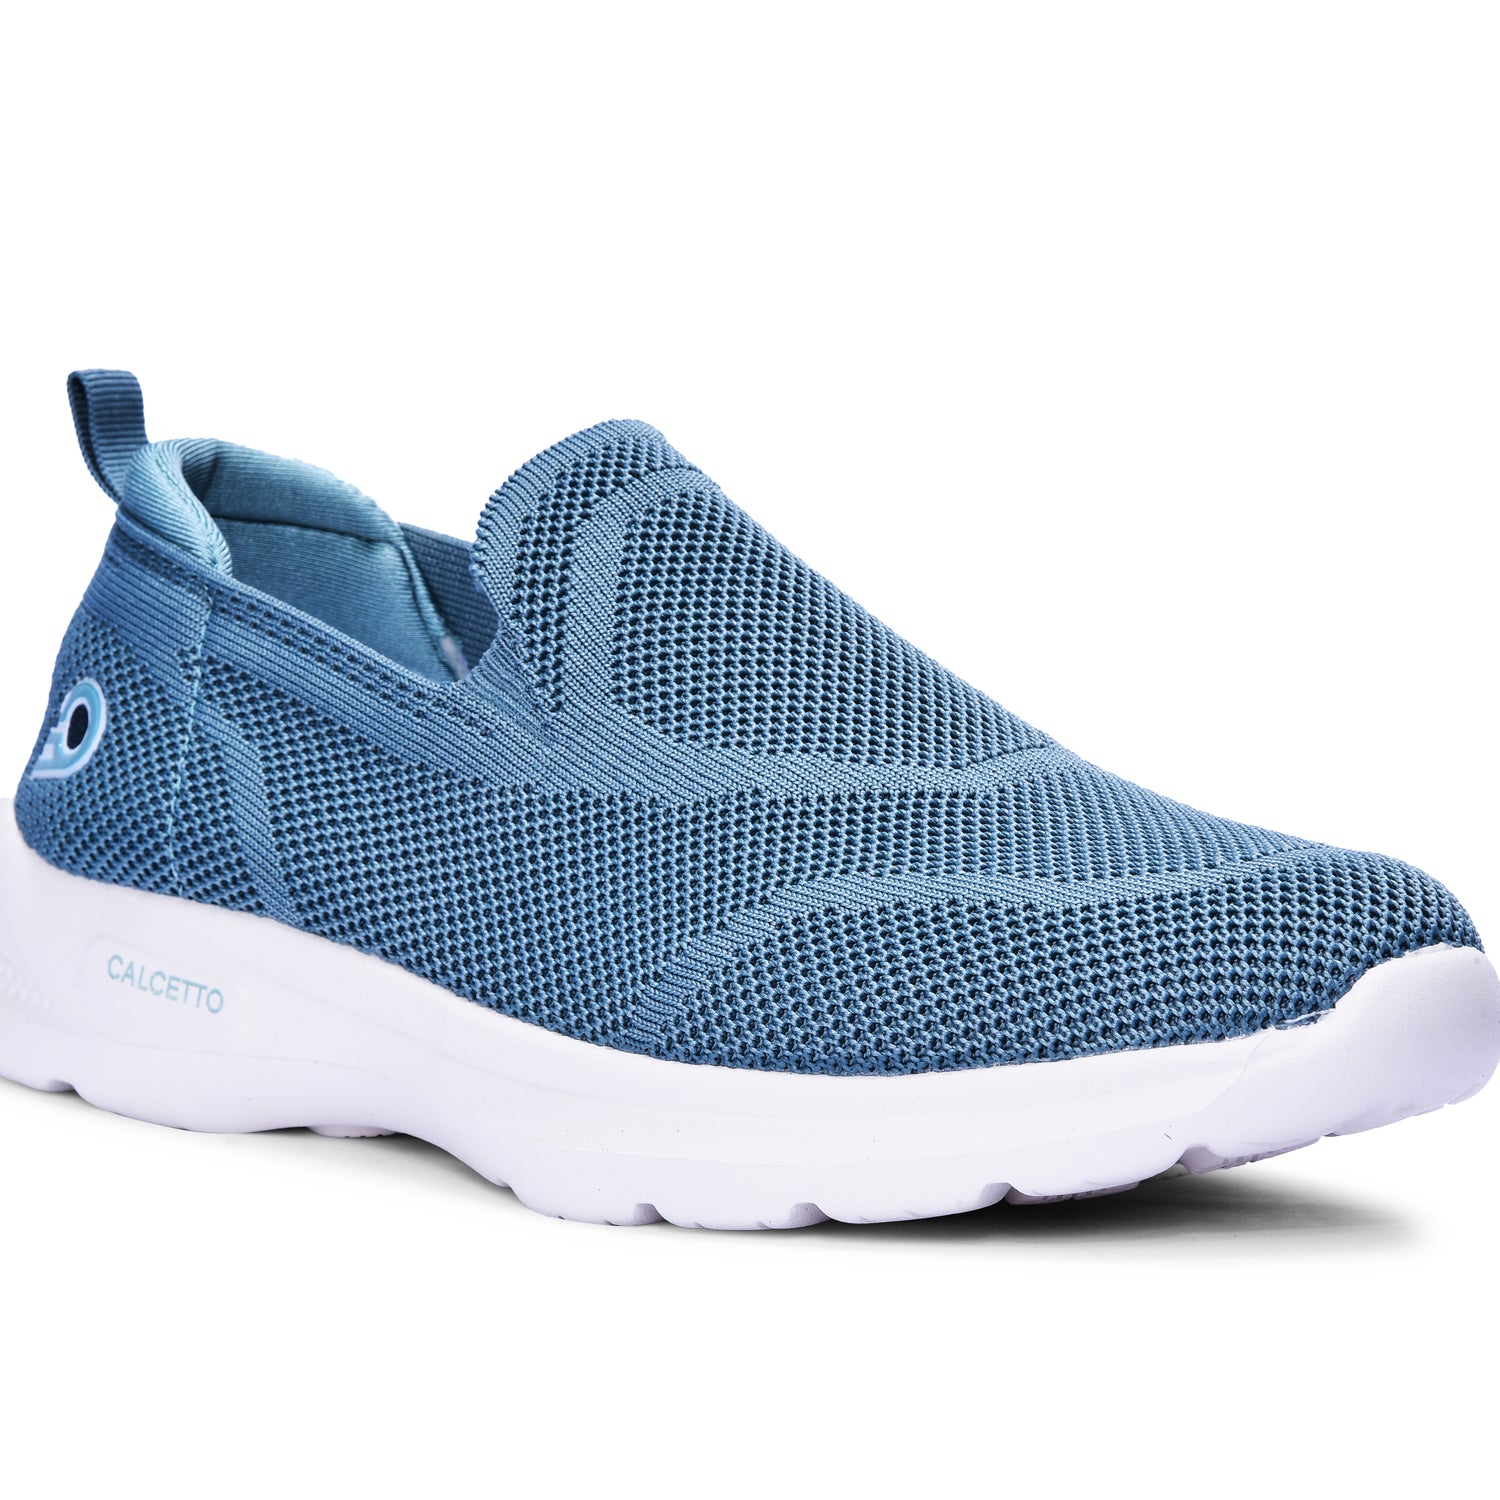 Calcetto CLT-9832 Blue Orchid Casual Slip On For Women